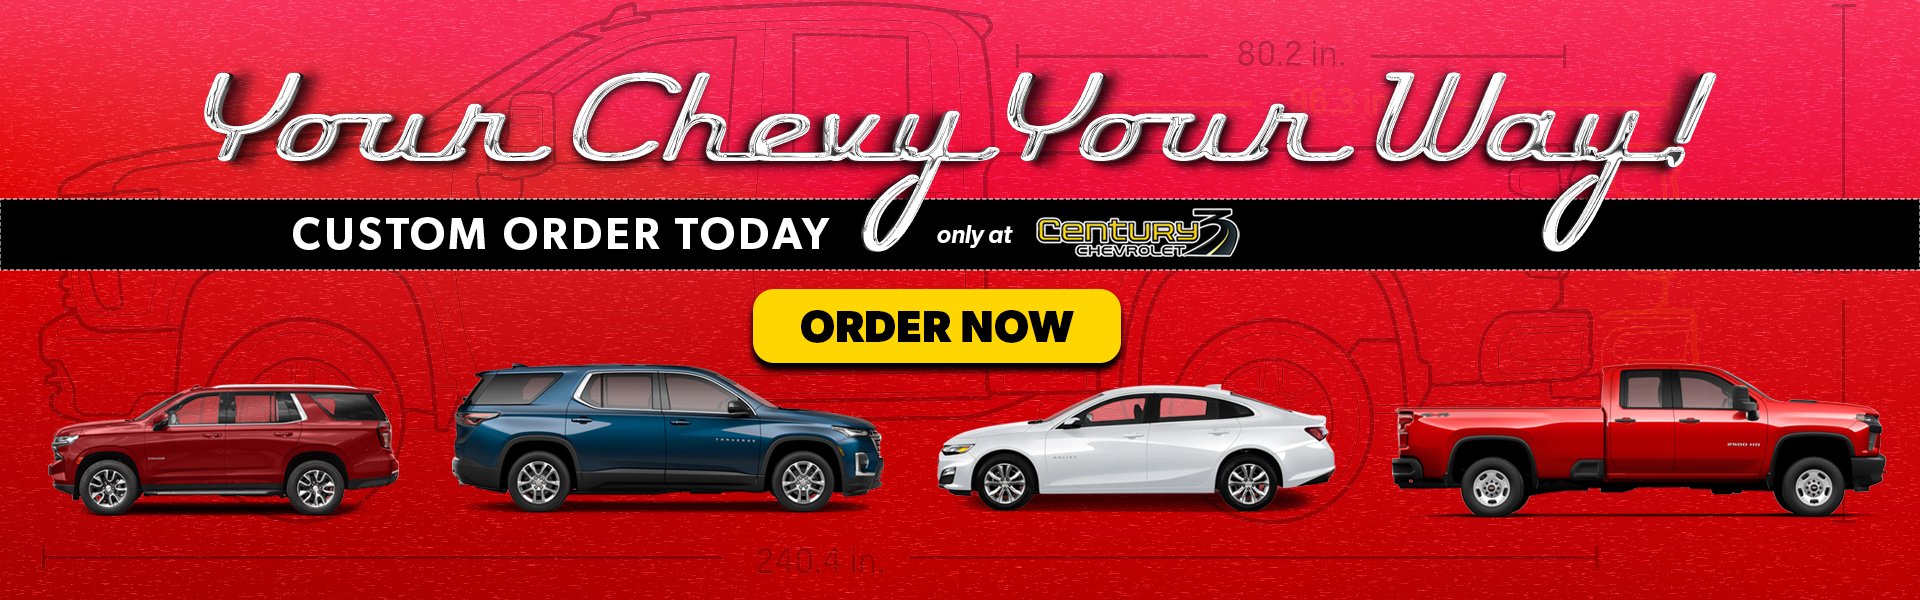 Custom order your new Chevy at Century 3 Chevrolet